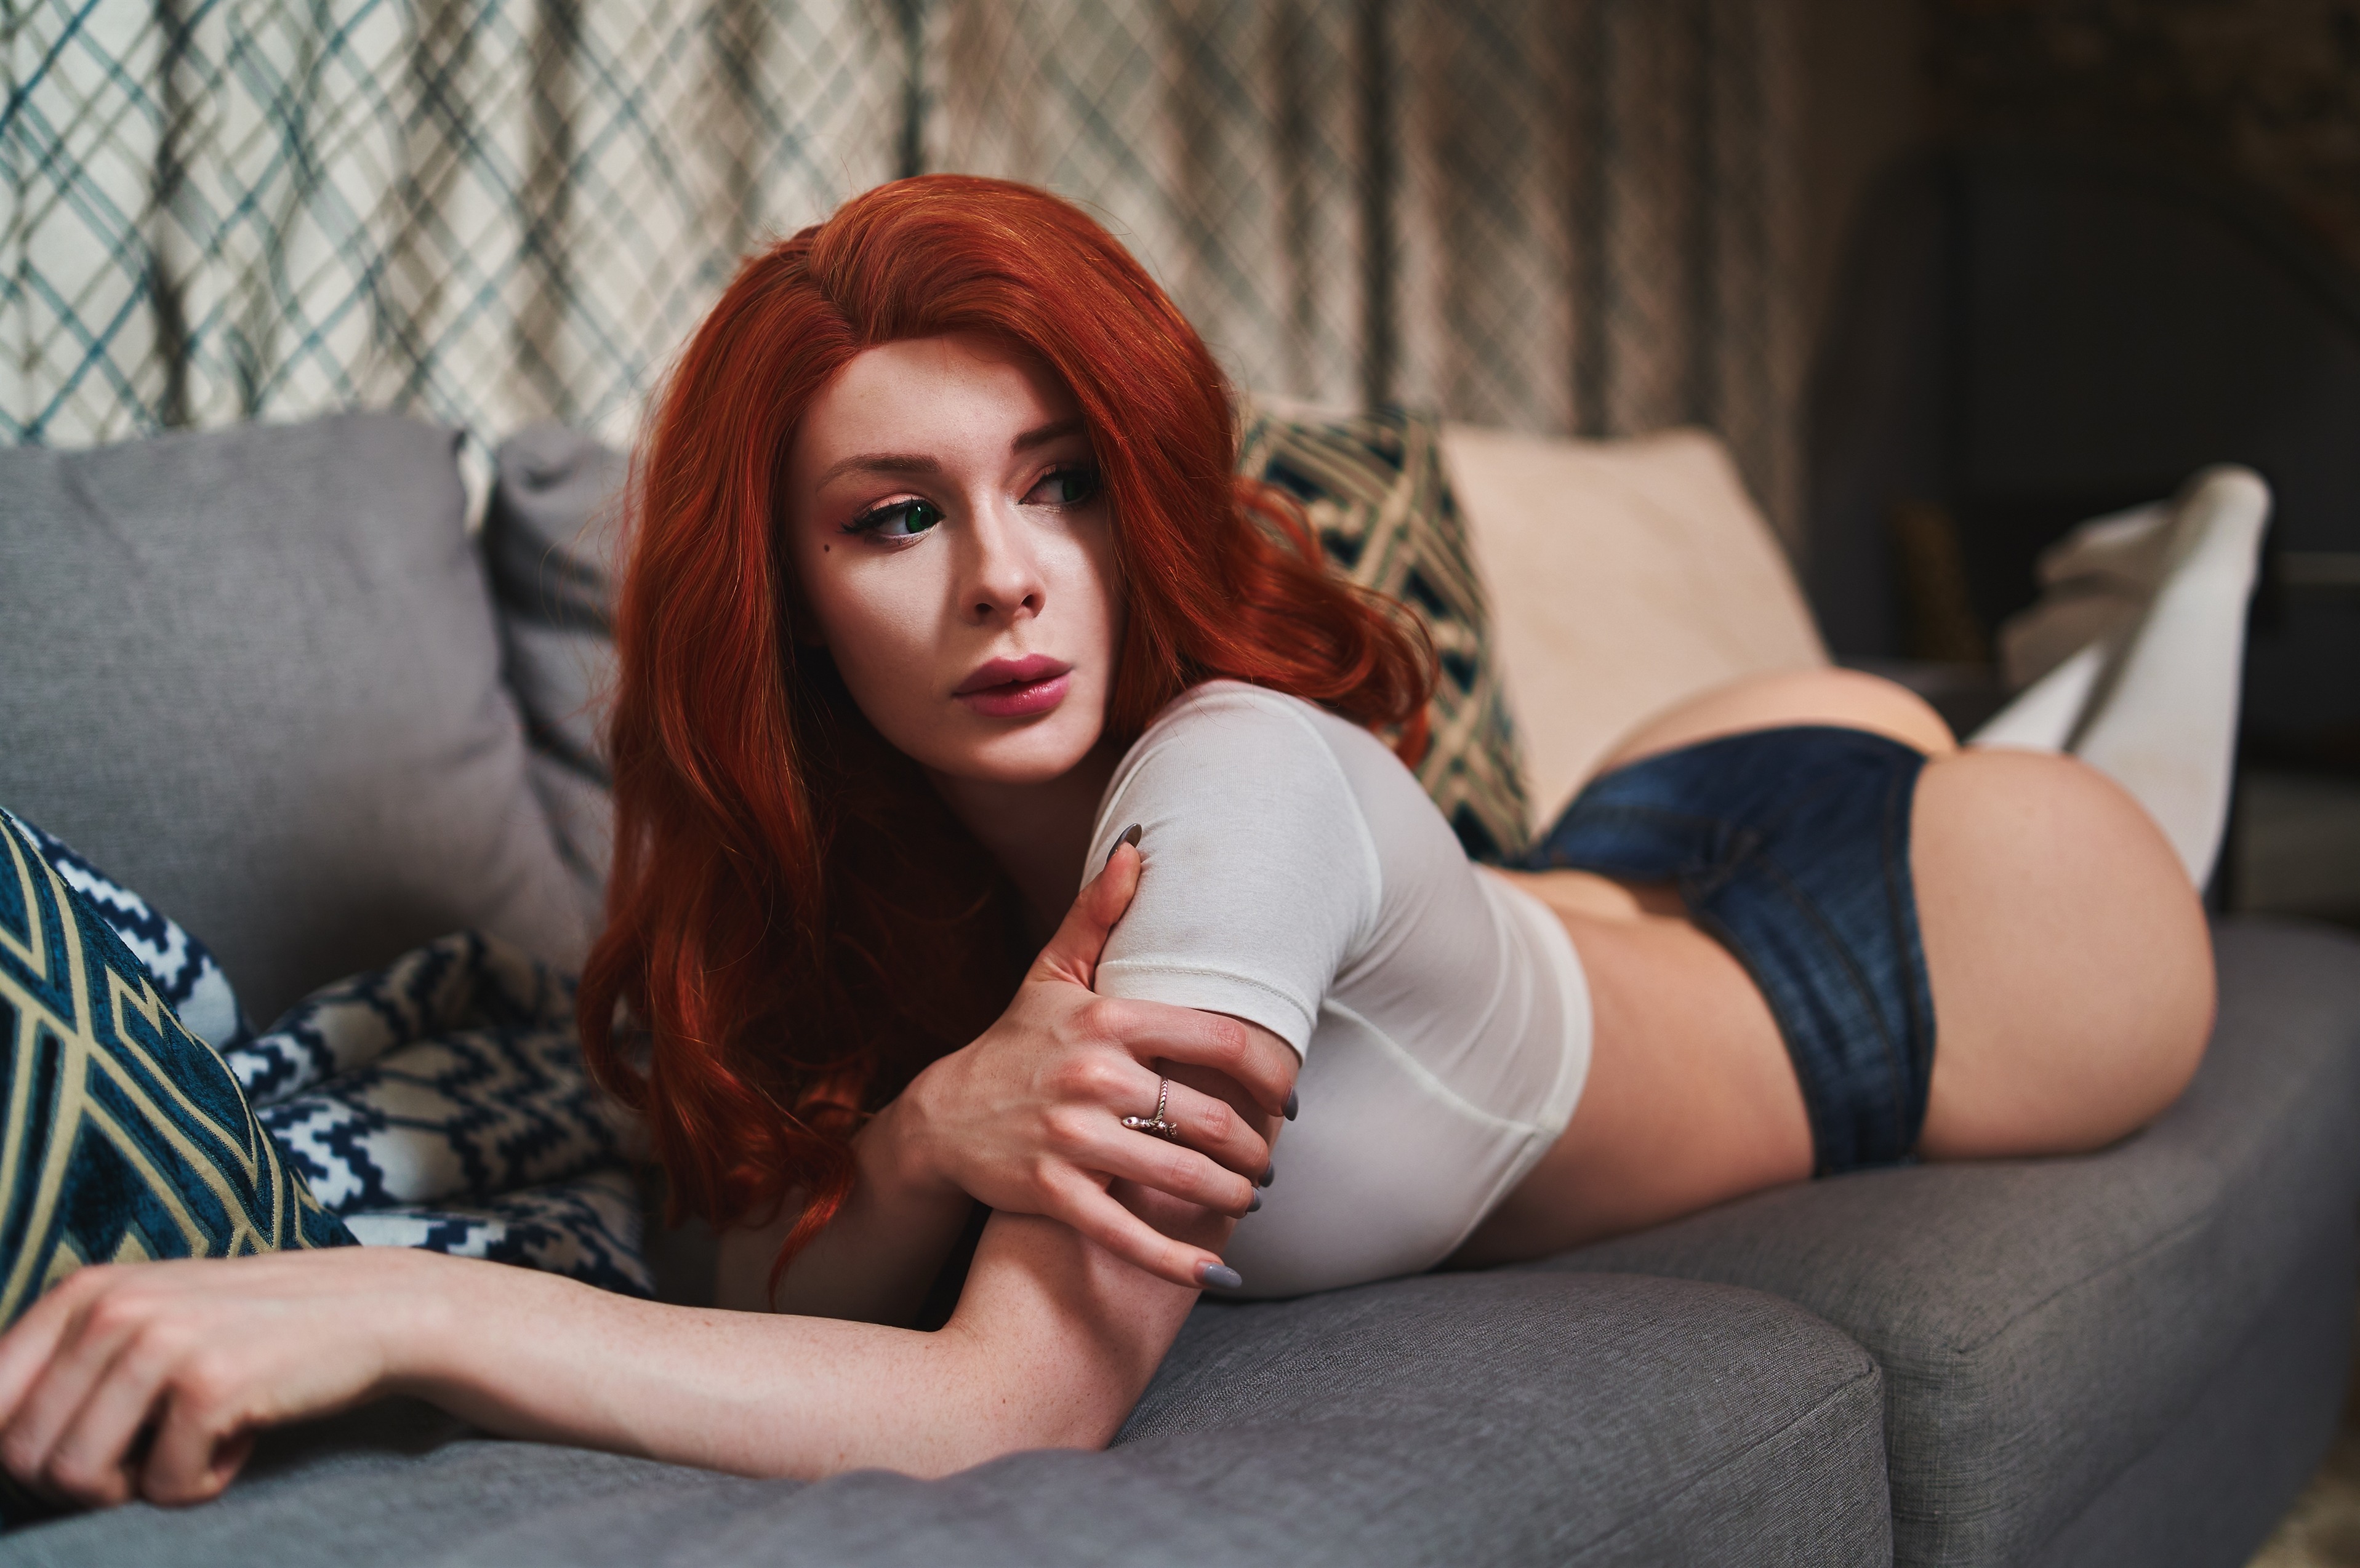 People 3834x2548 Jenna Lynn Meowri women model redhead cosplay Mary Jane Watson Spider-Man white tops looking away high waisted shorts thigh high socks thigh-highs lying on front ass couch indoors women indoors